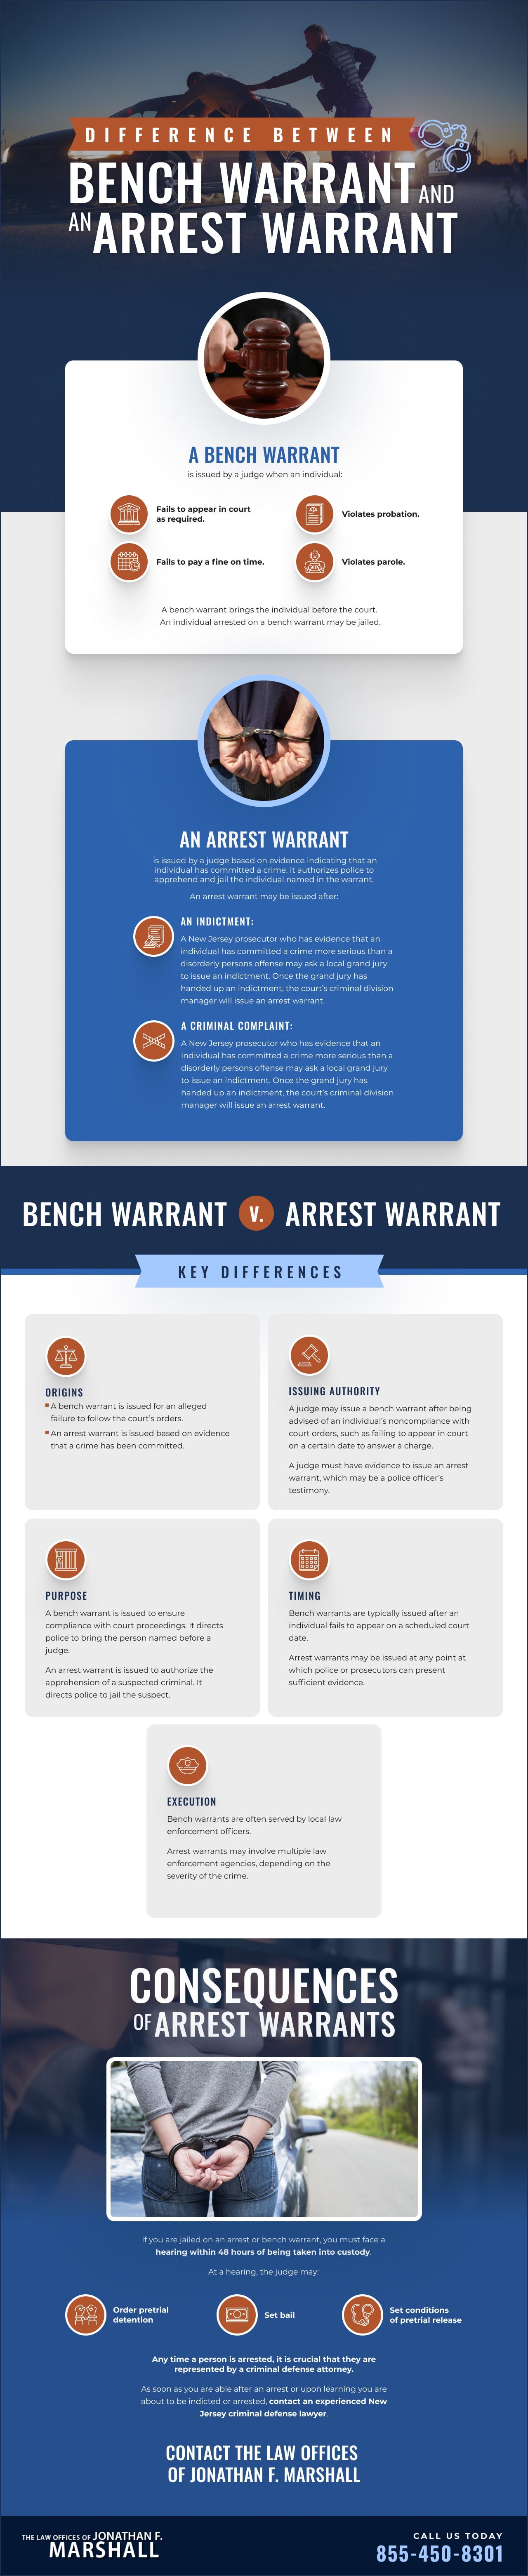 Difference Between A Bench Warrant And An Arrest Warrant 